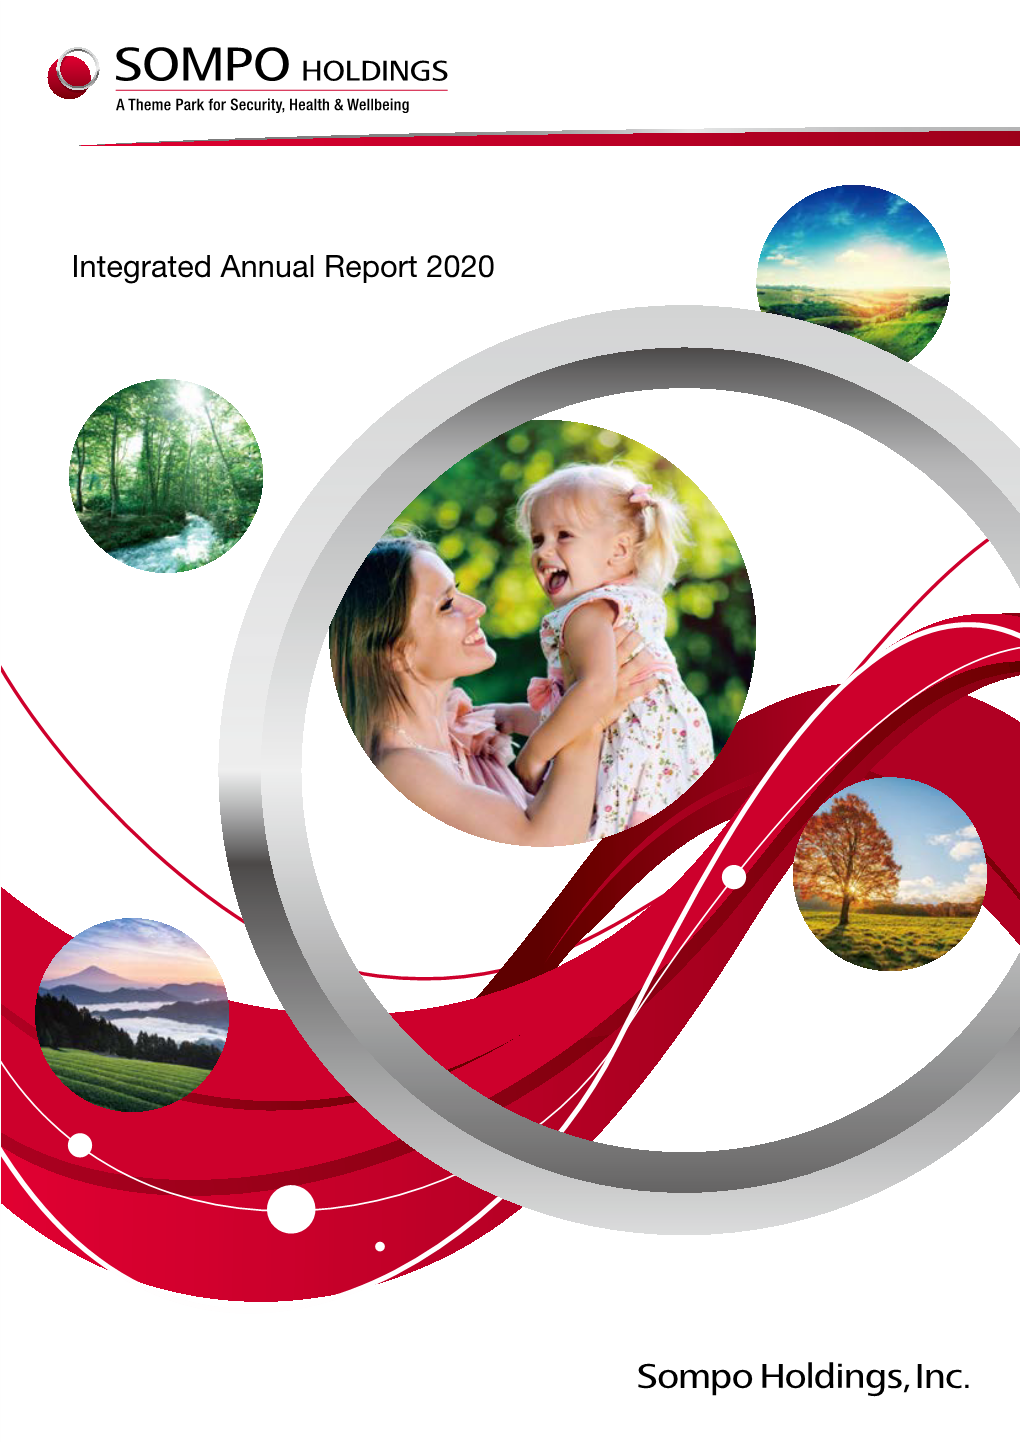 Integrated Annual Report 2020 SOMPO Holdings, Inc